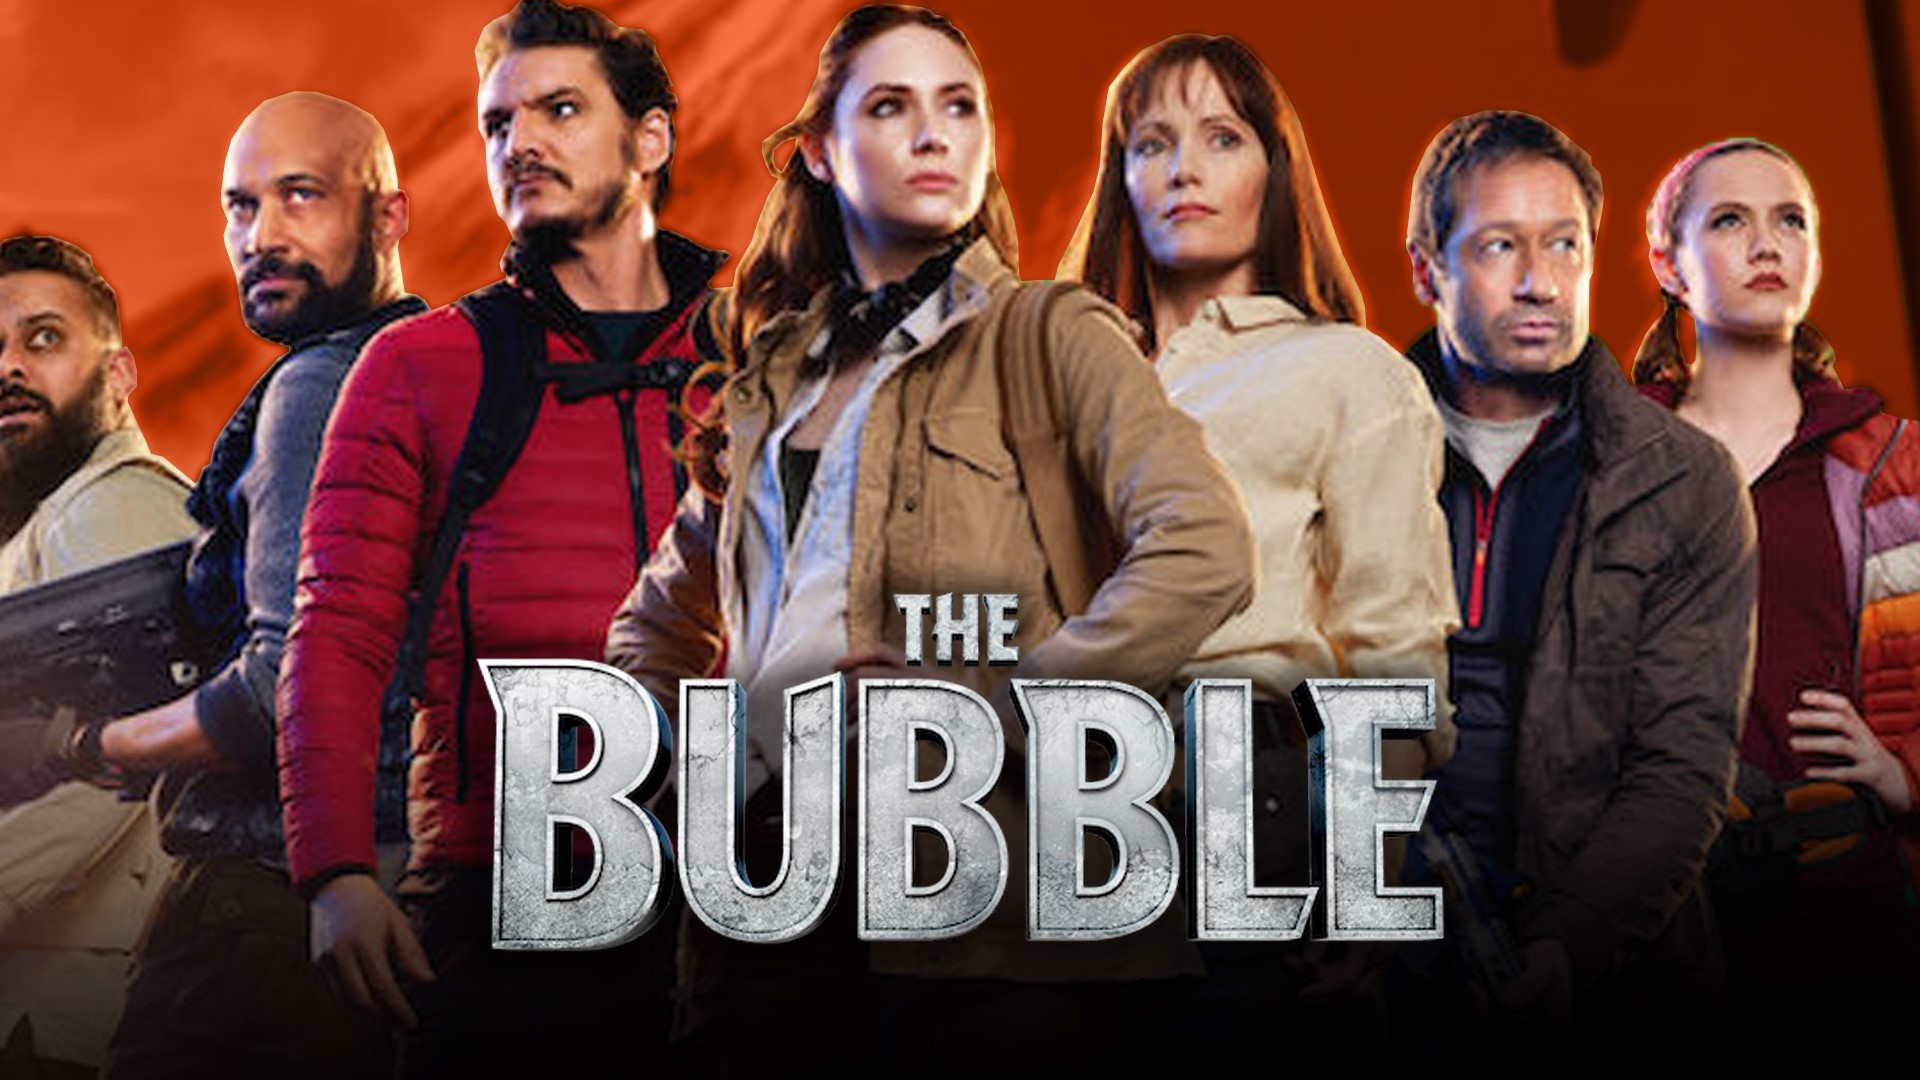 Judd Apatow's latest movie The Bubble is not funny, not concise, and adds to the growing pile of bad movies set during the pandemic.